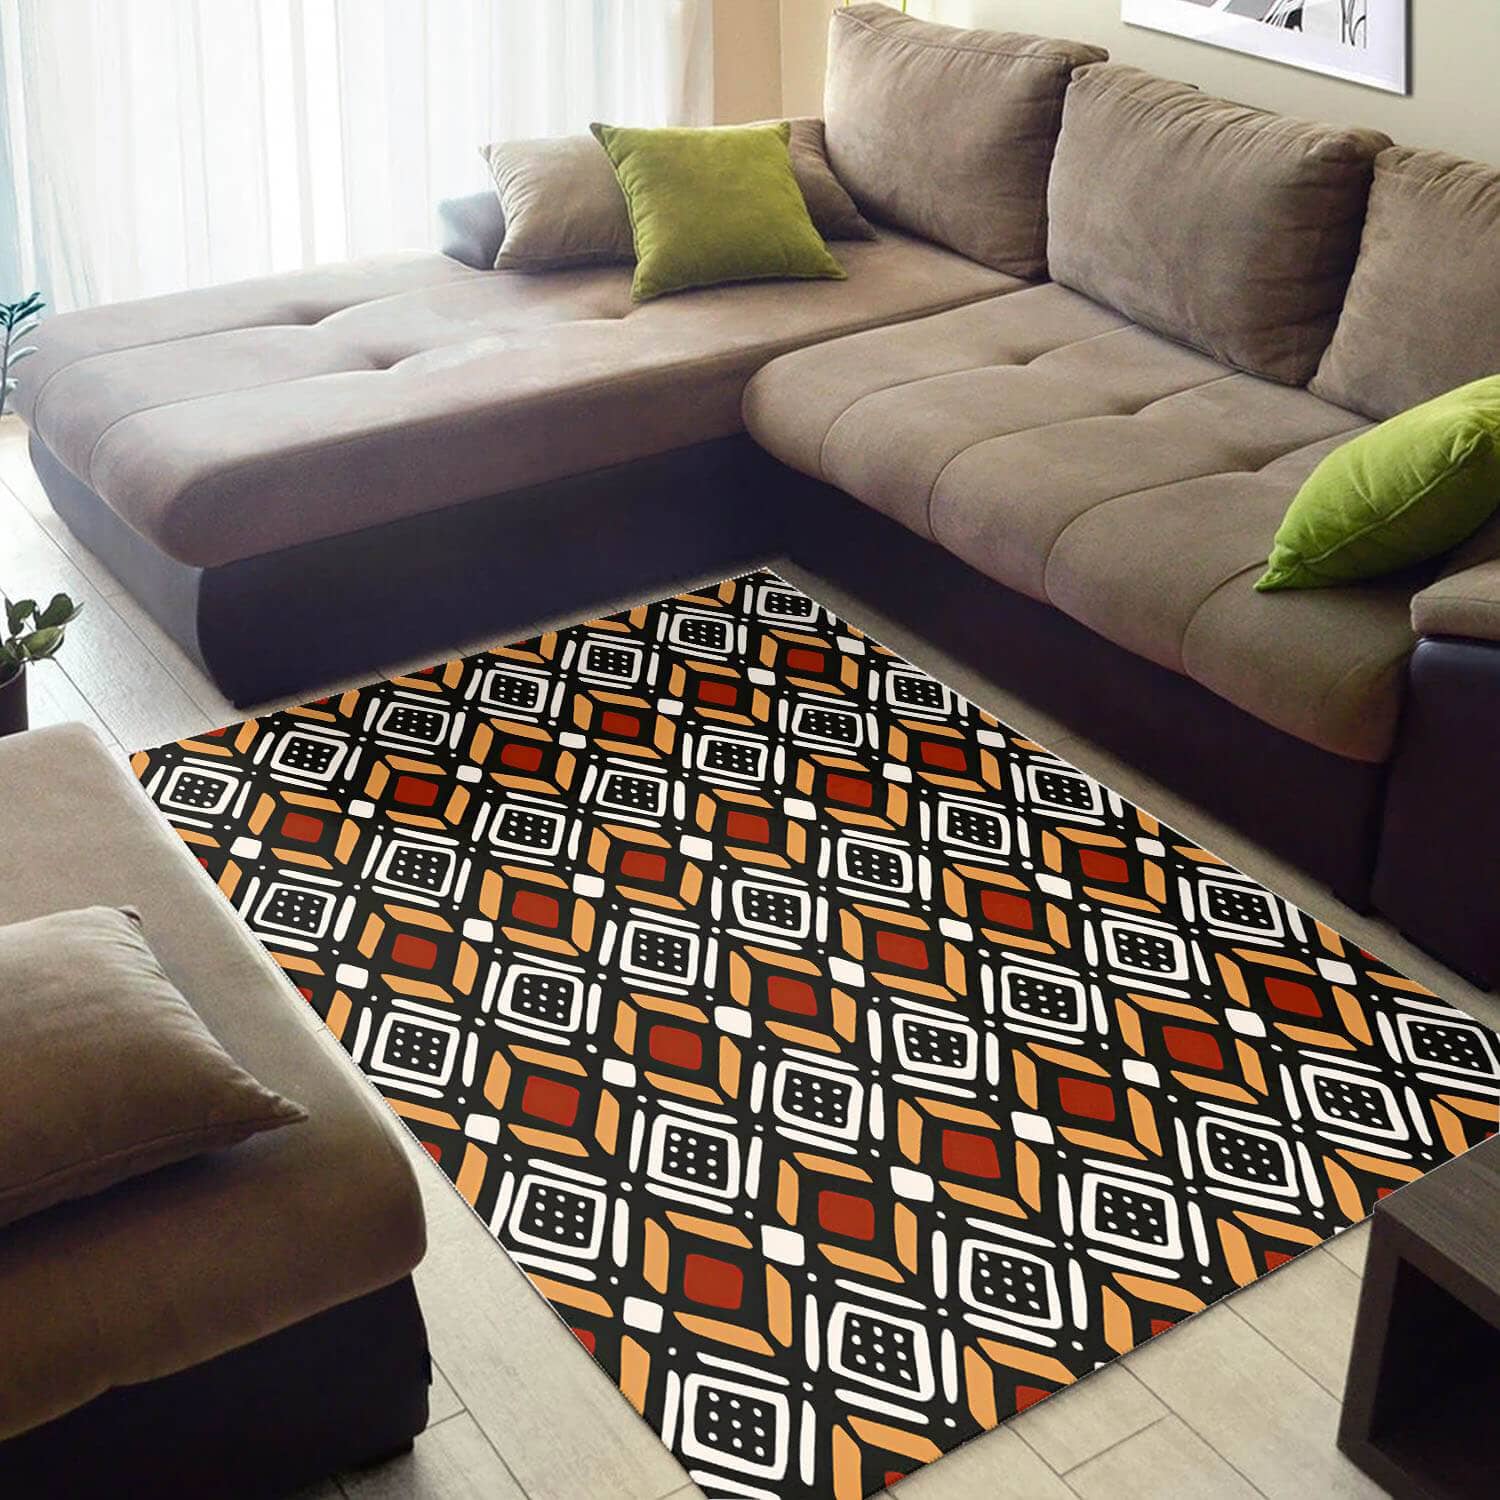 Beautiful African American Graphic Black Art Afrocentric Design Floor Inspired Home Rug